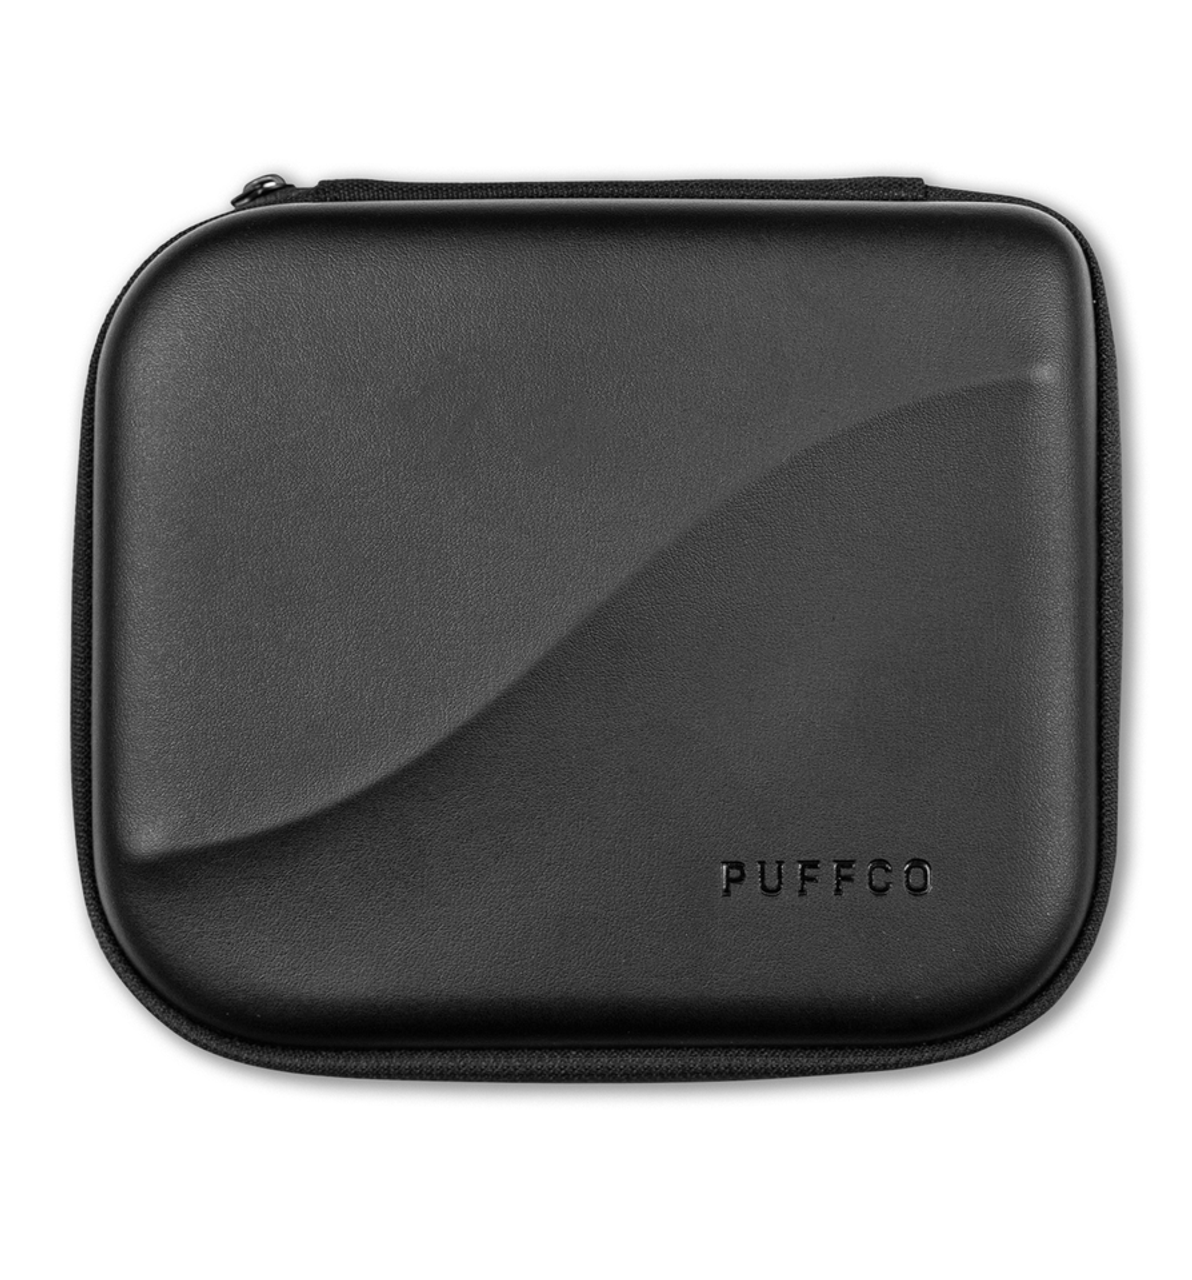 Puffco Proxy Vaporizer in black carrying case, portable design, top view on white background